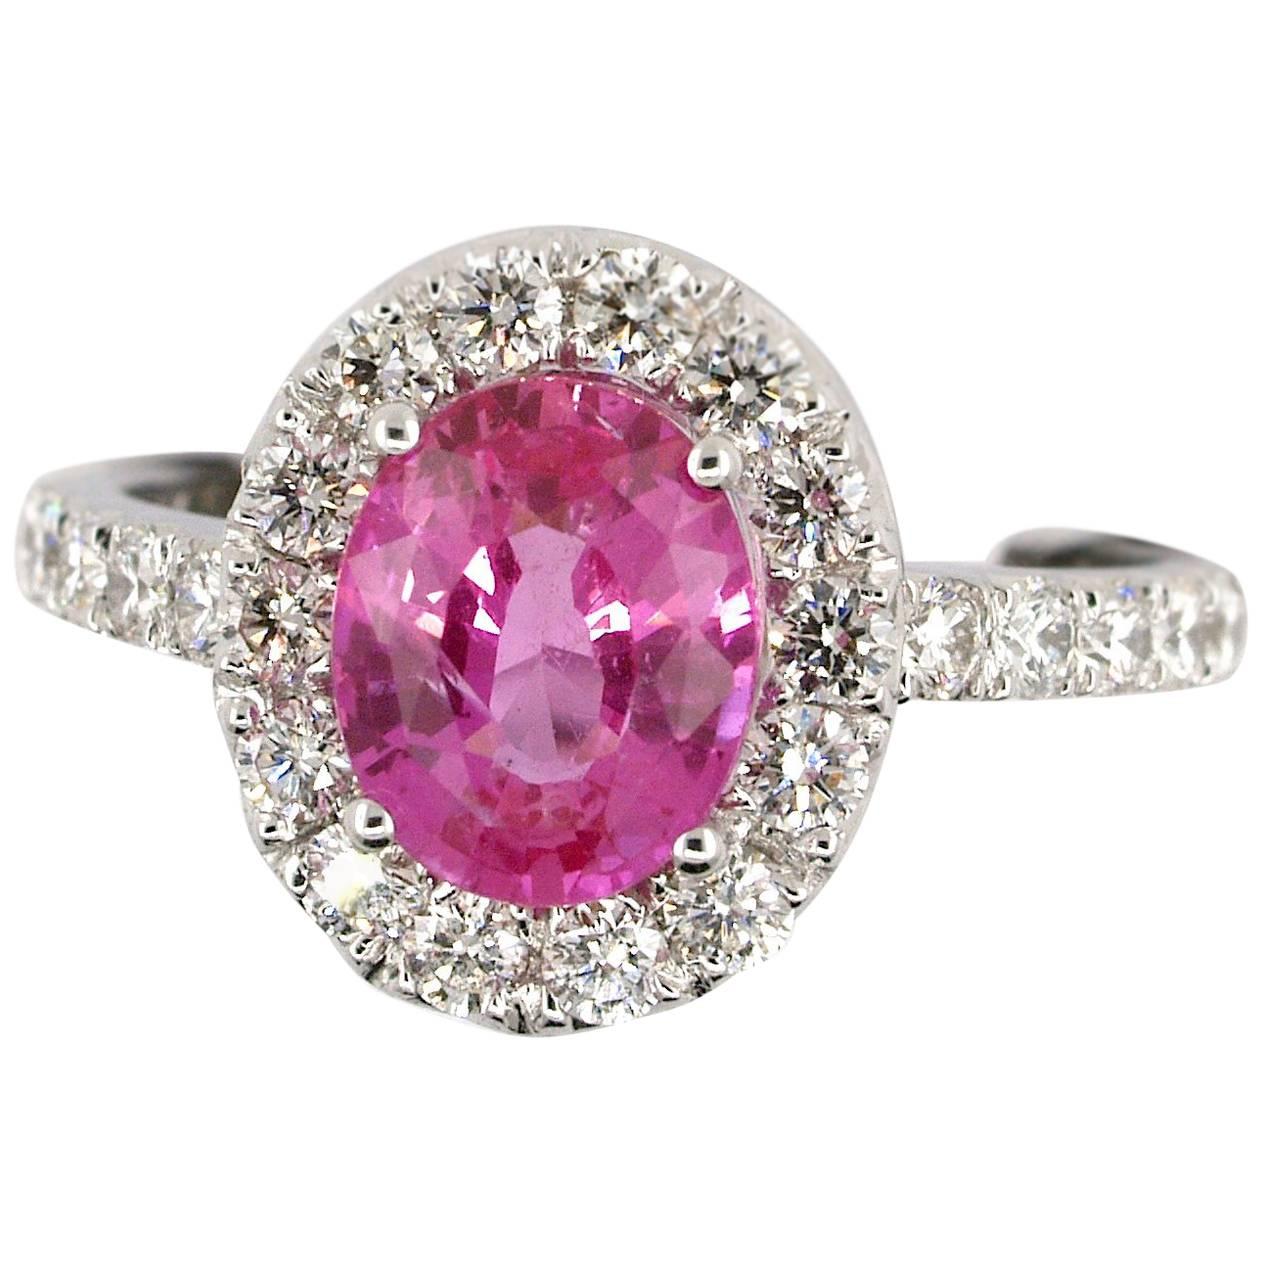 Certified Unheated 2.28 Carat Oval Pink Sapphire Diamond Gold 18 Karat Ring For Sale